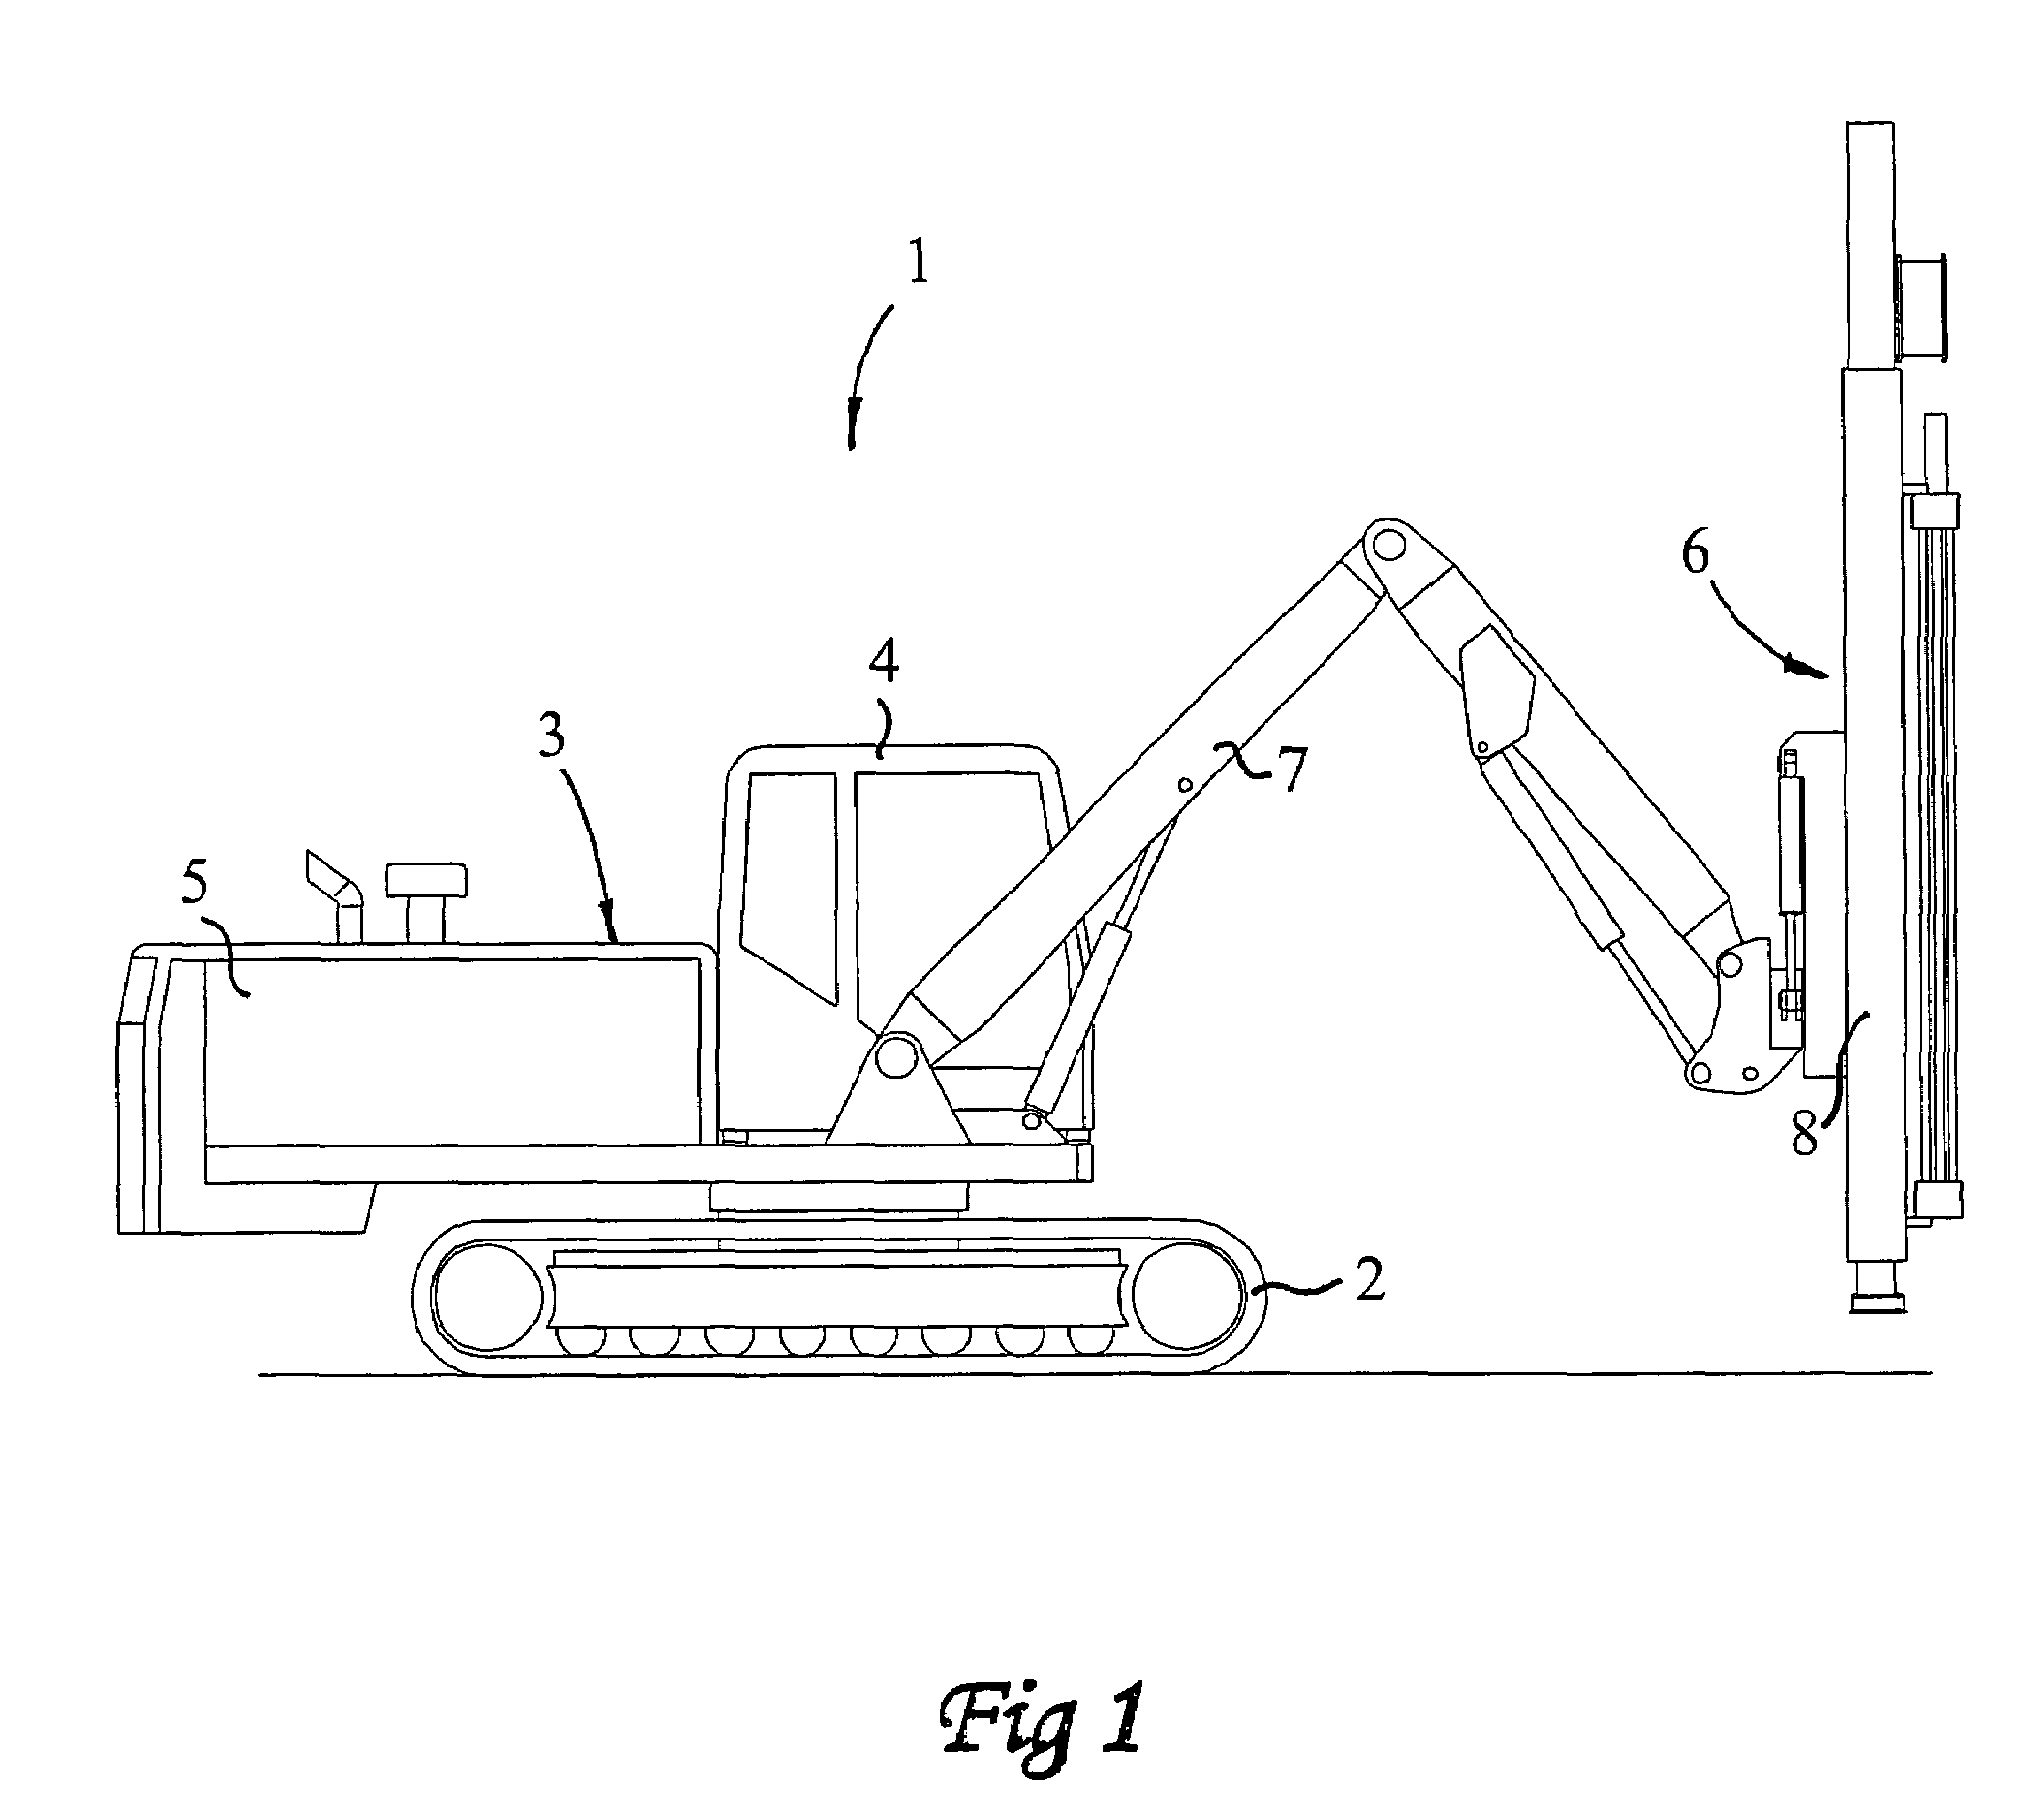 Drill rig and a method for controlling a fan therein